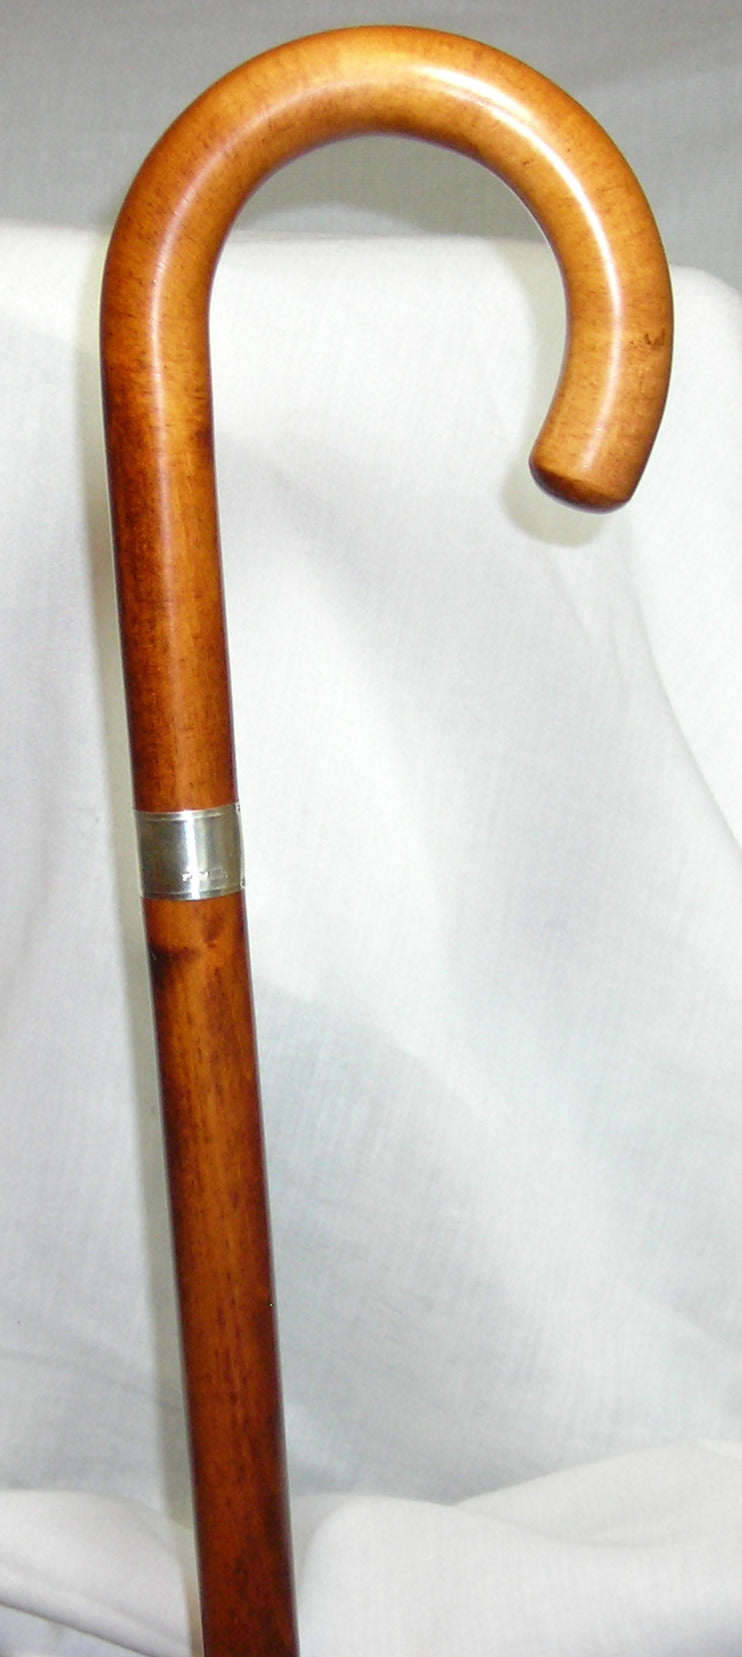 Cherry-Stained Maple Wood Tourist Crook 36